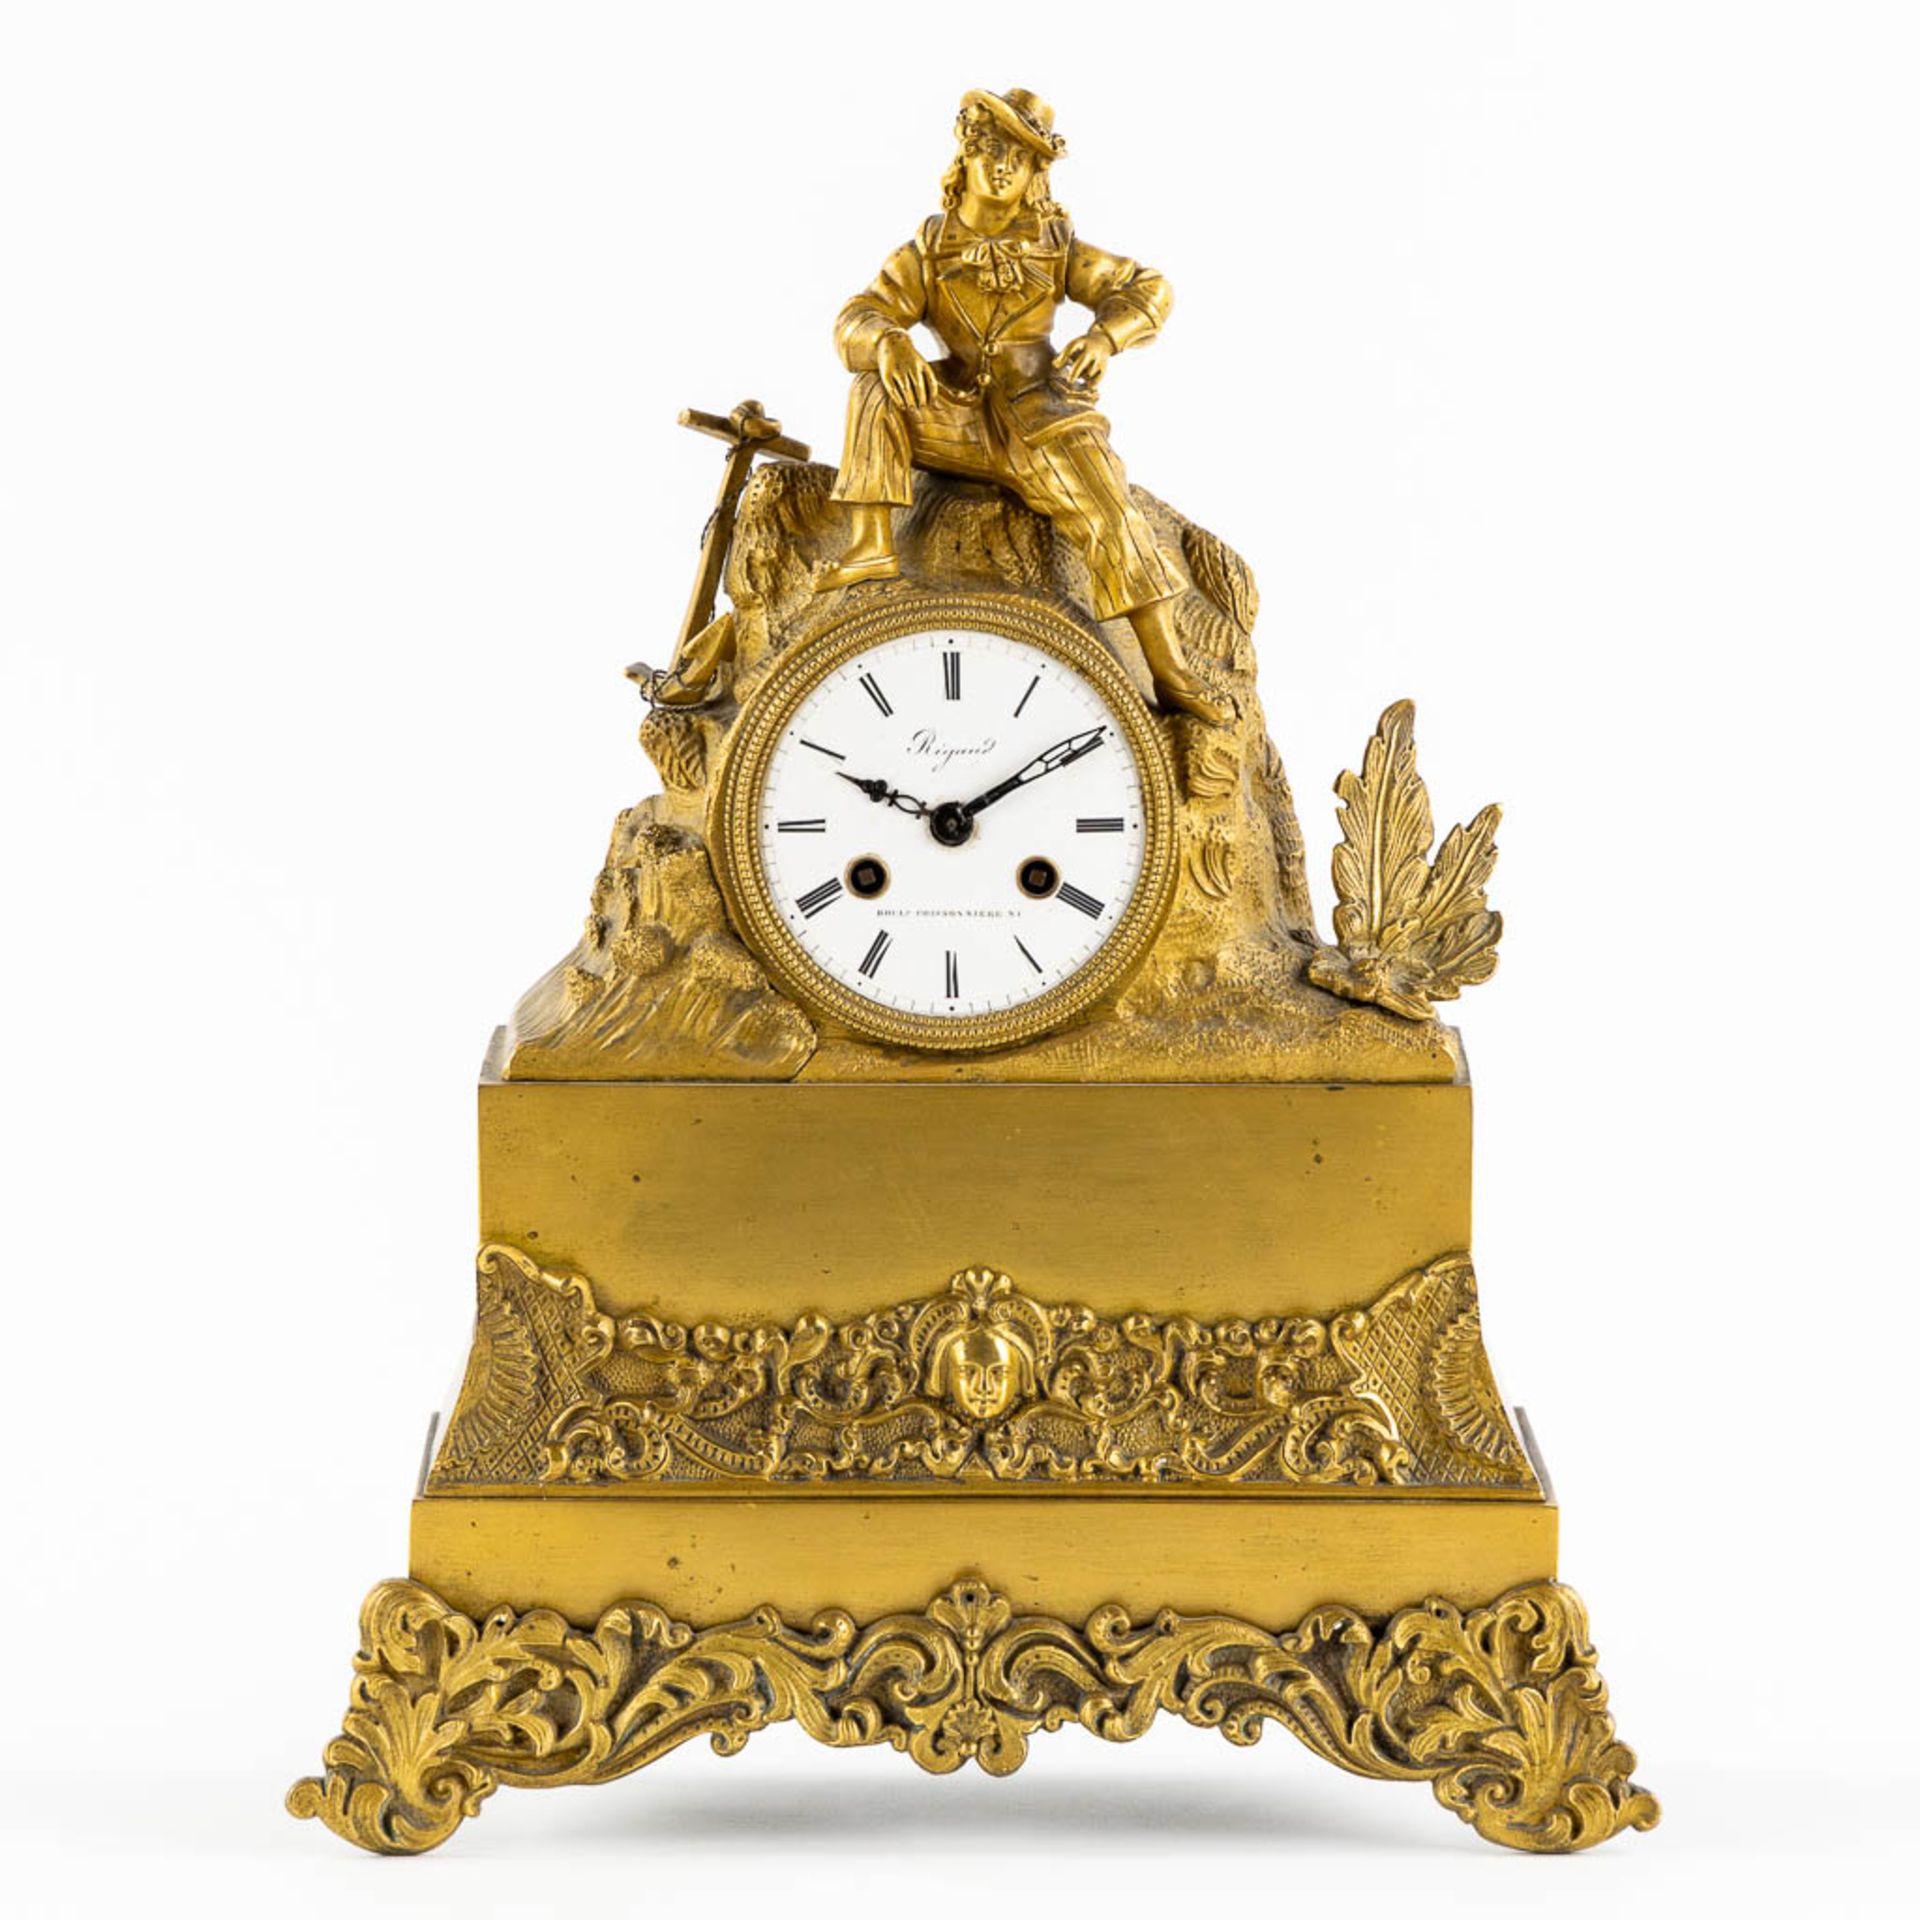 A mantle clock, gilt bronze with an image of a young man. France, 19th C. (L:10 x W:27 x H:35 cm)